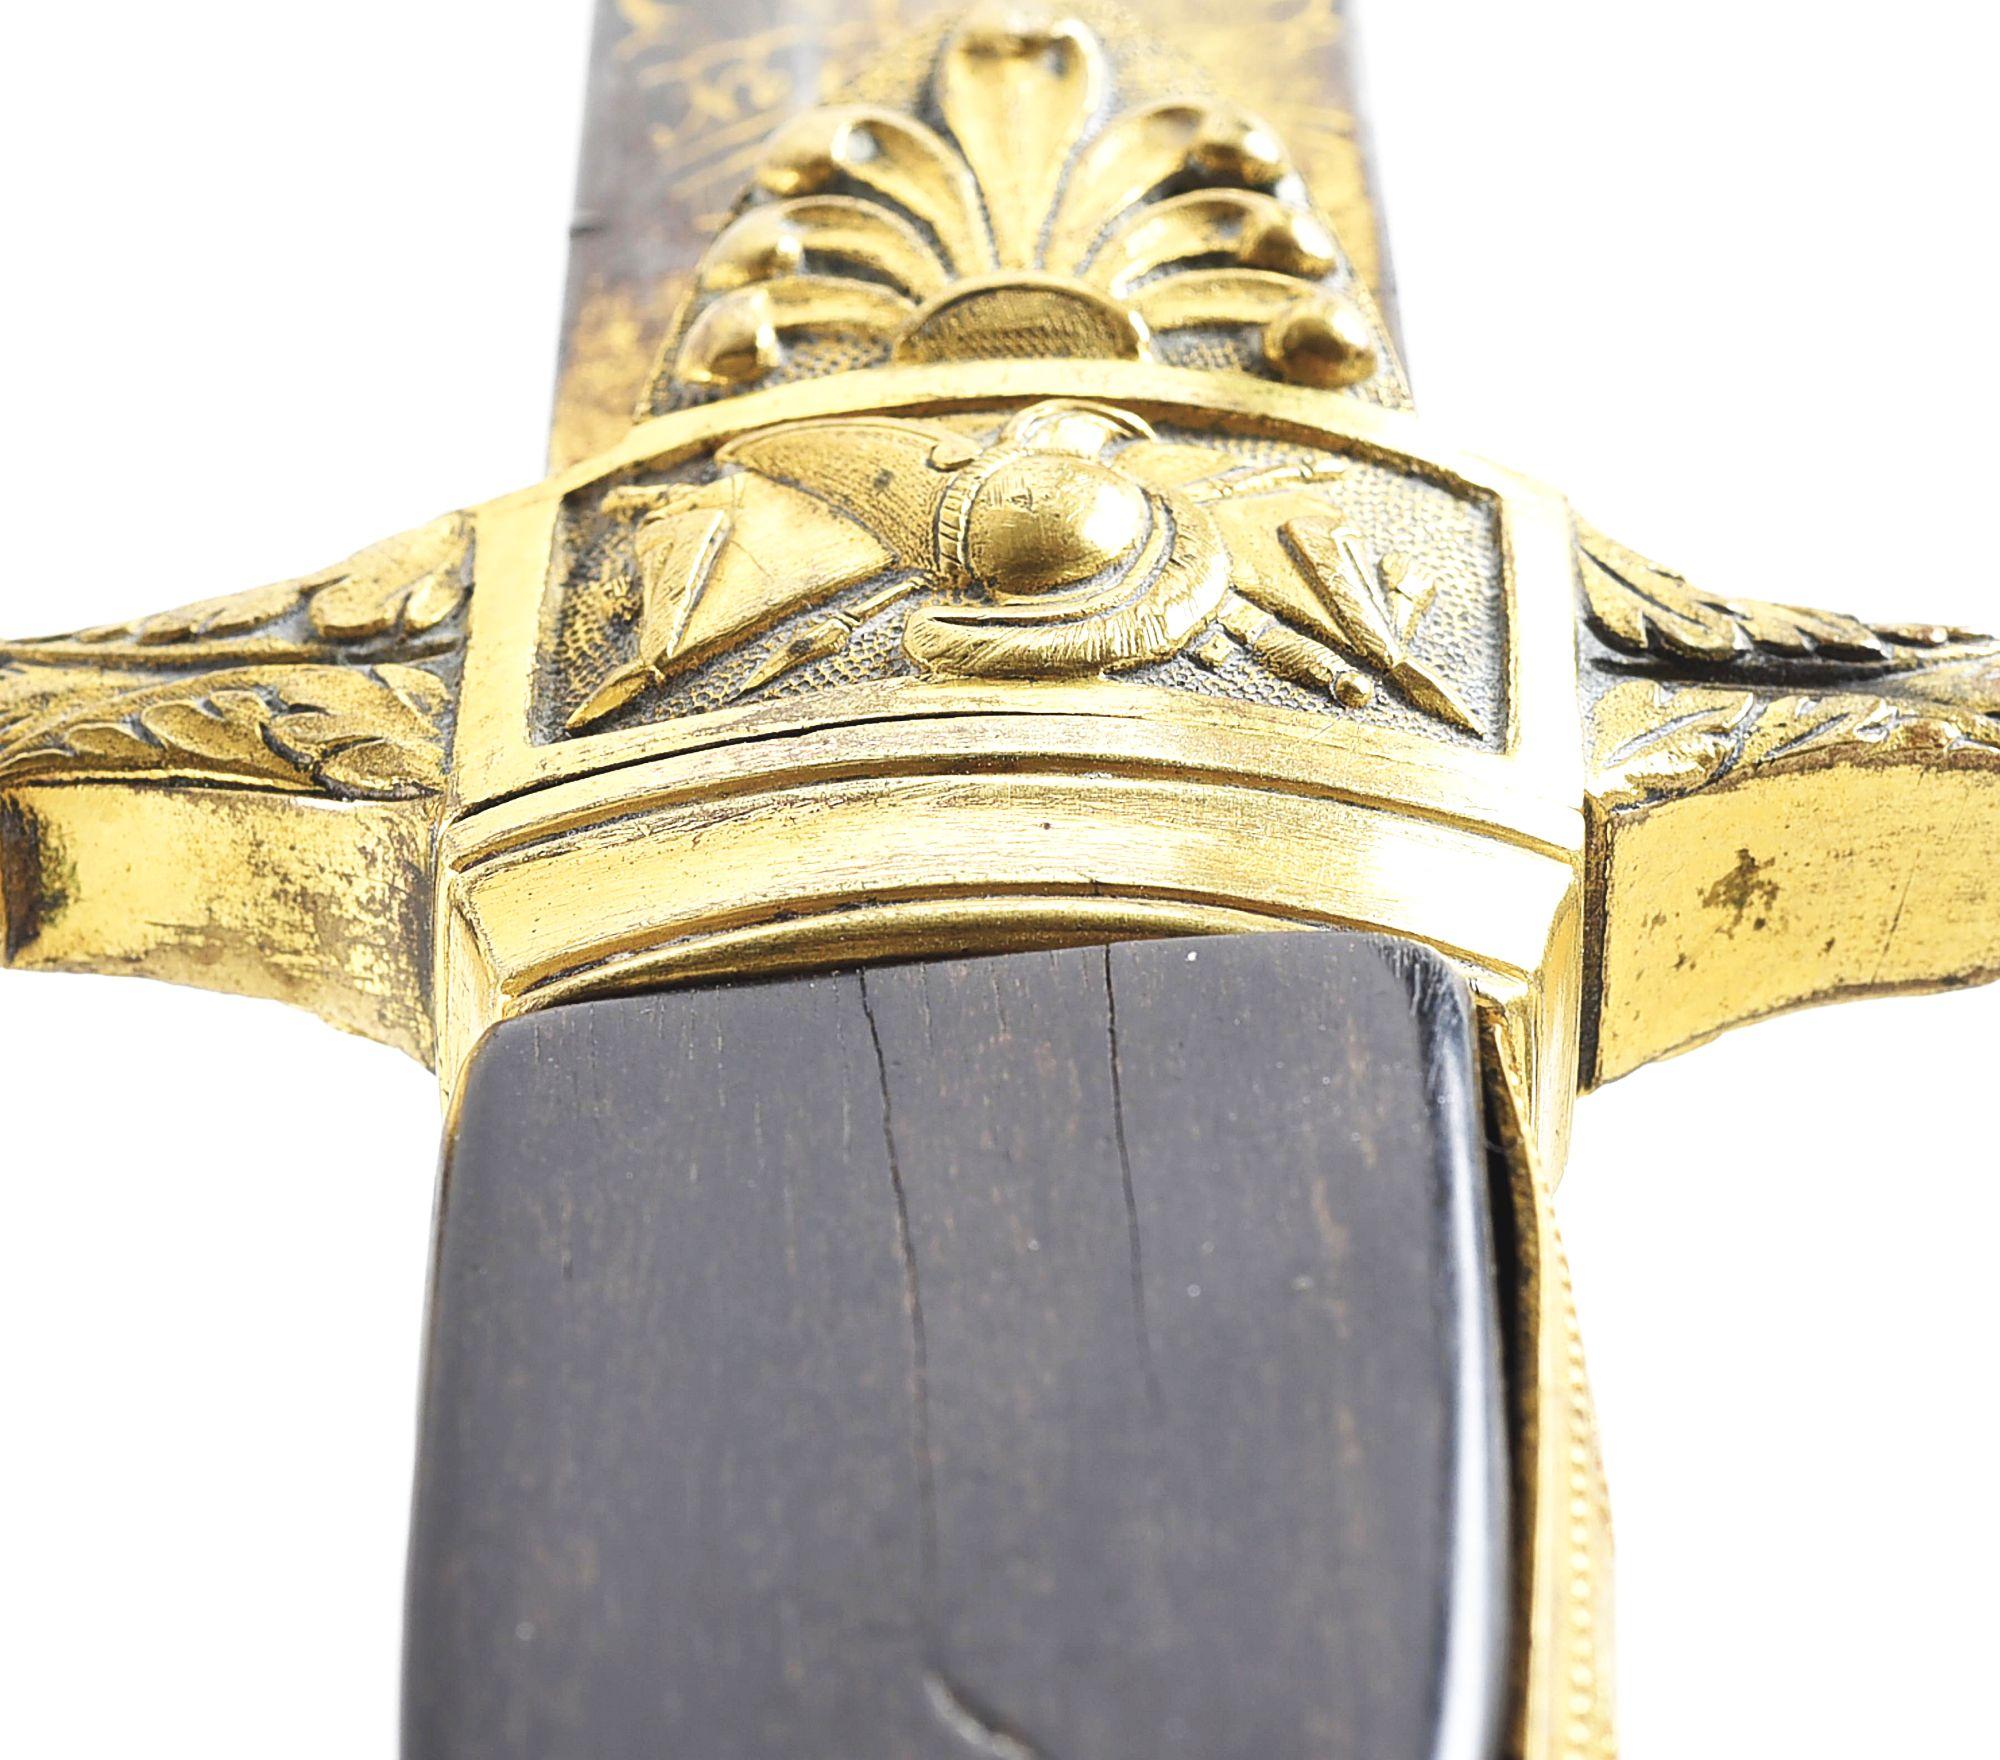 STANDISH BARRY FRENCH IMPORTED EAGLE HEAD POMMEL SABER WITH SCABBARD, RETAILED BY C & J.D. WOLFE.